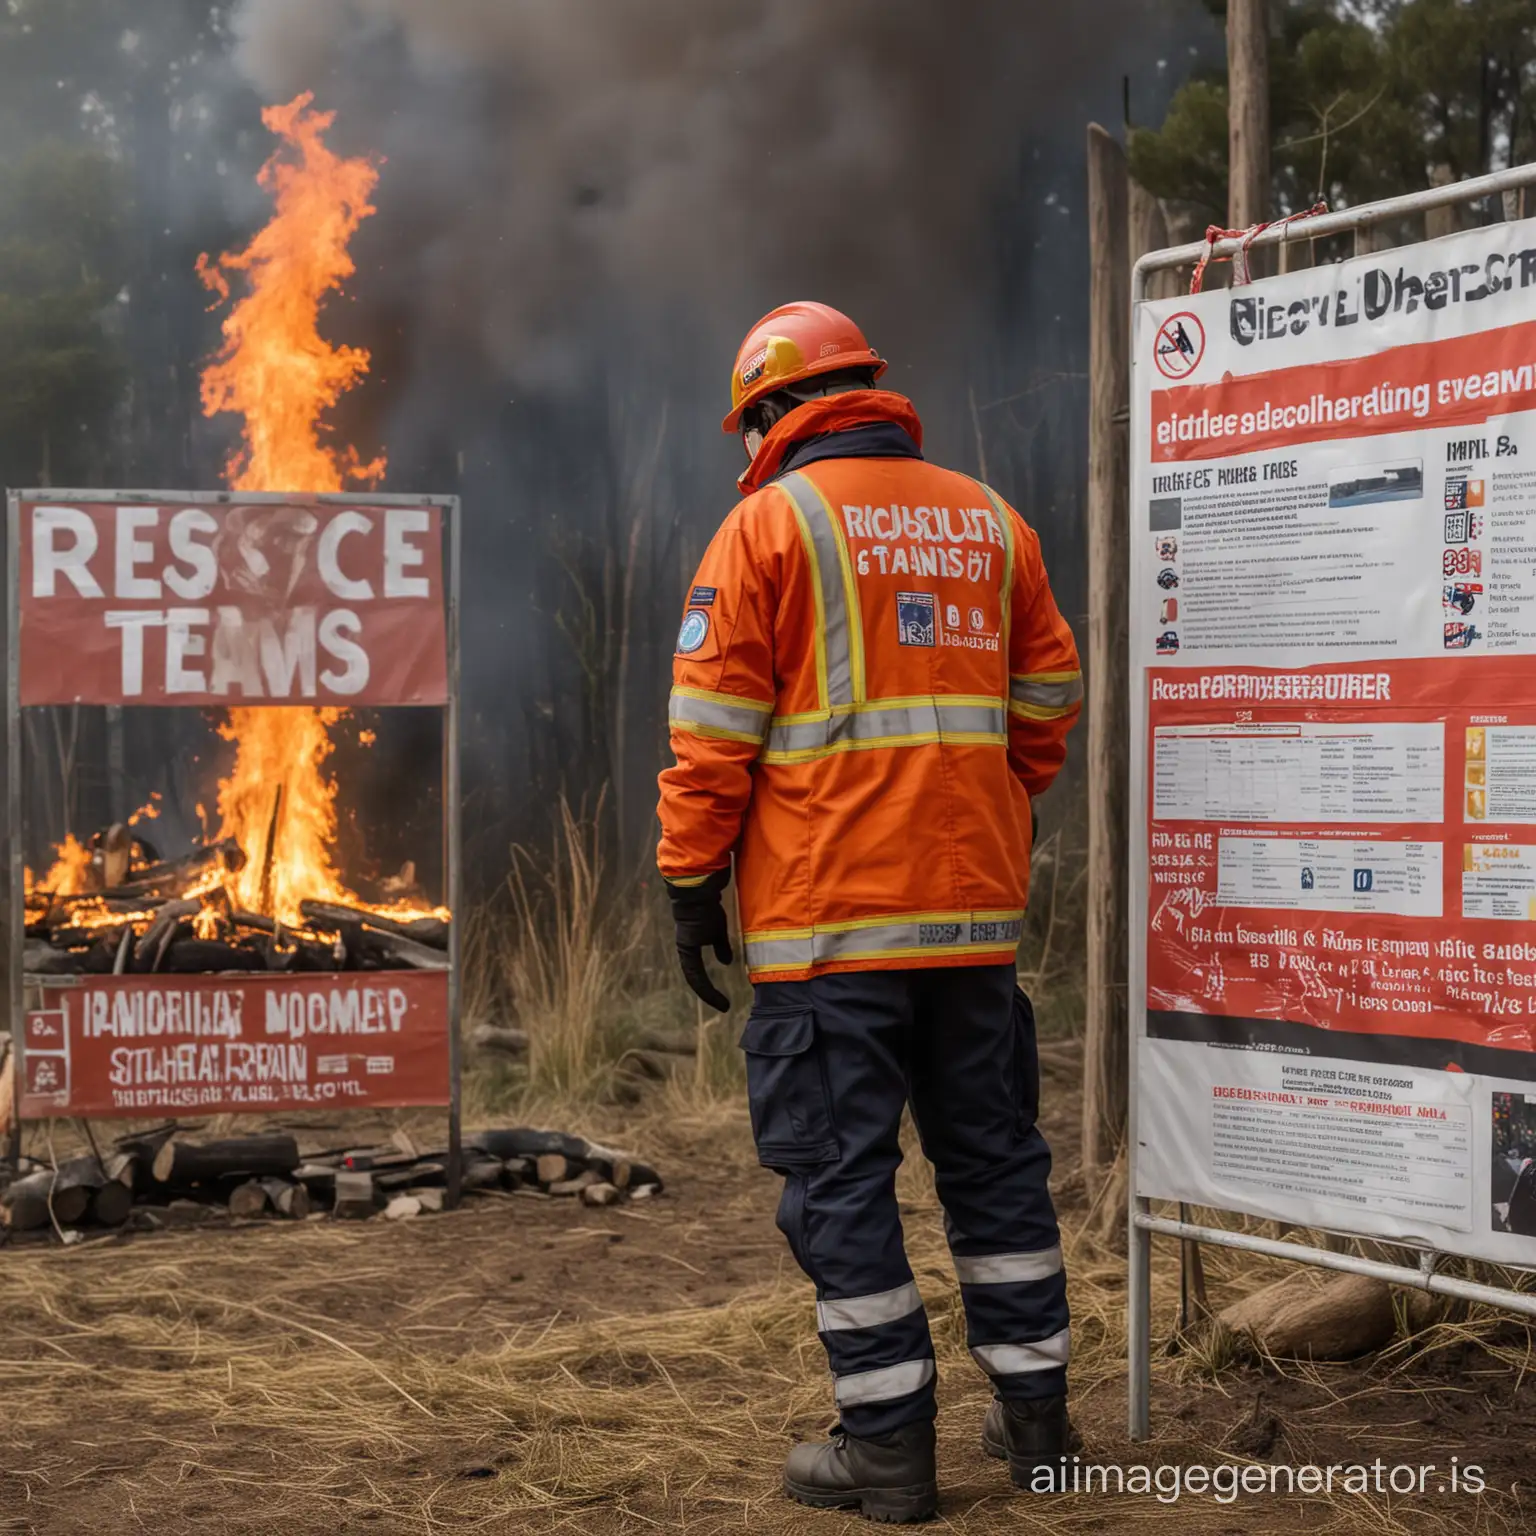 A background with fires and a standing person wearing rescue team clothing, next to an information sign